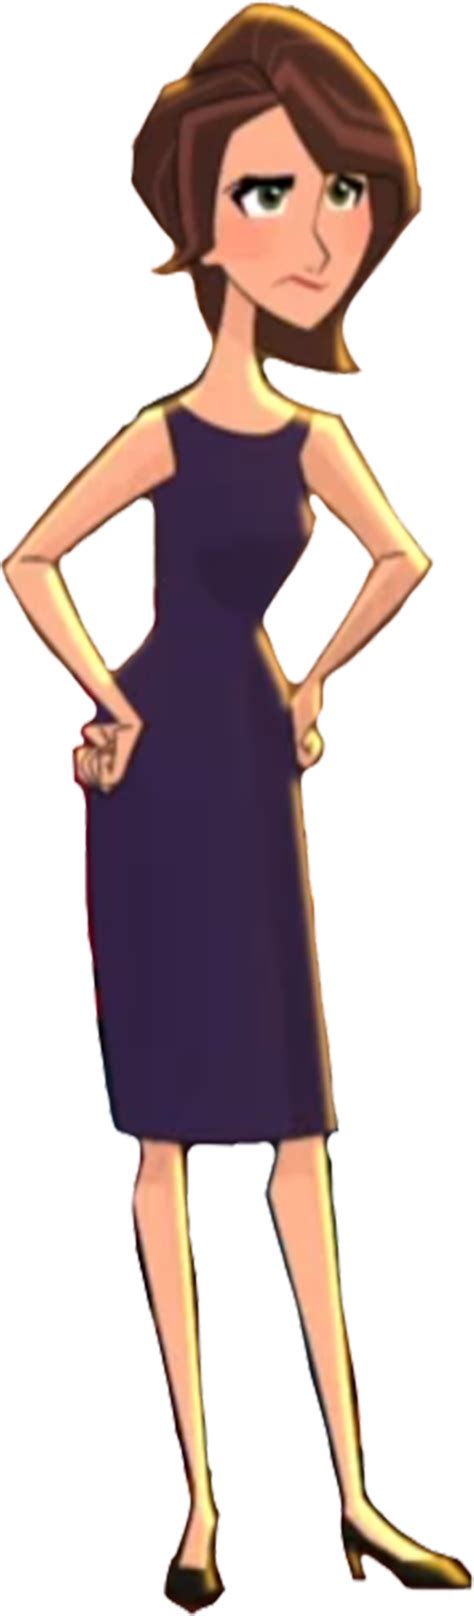 Aunt Cass Bh6 The Series In Her Dress Vector 3 By Homersimpson1983 On Deviantart